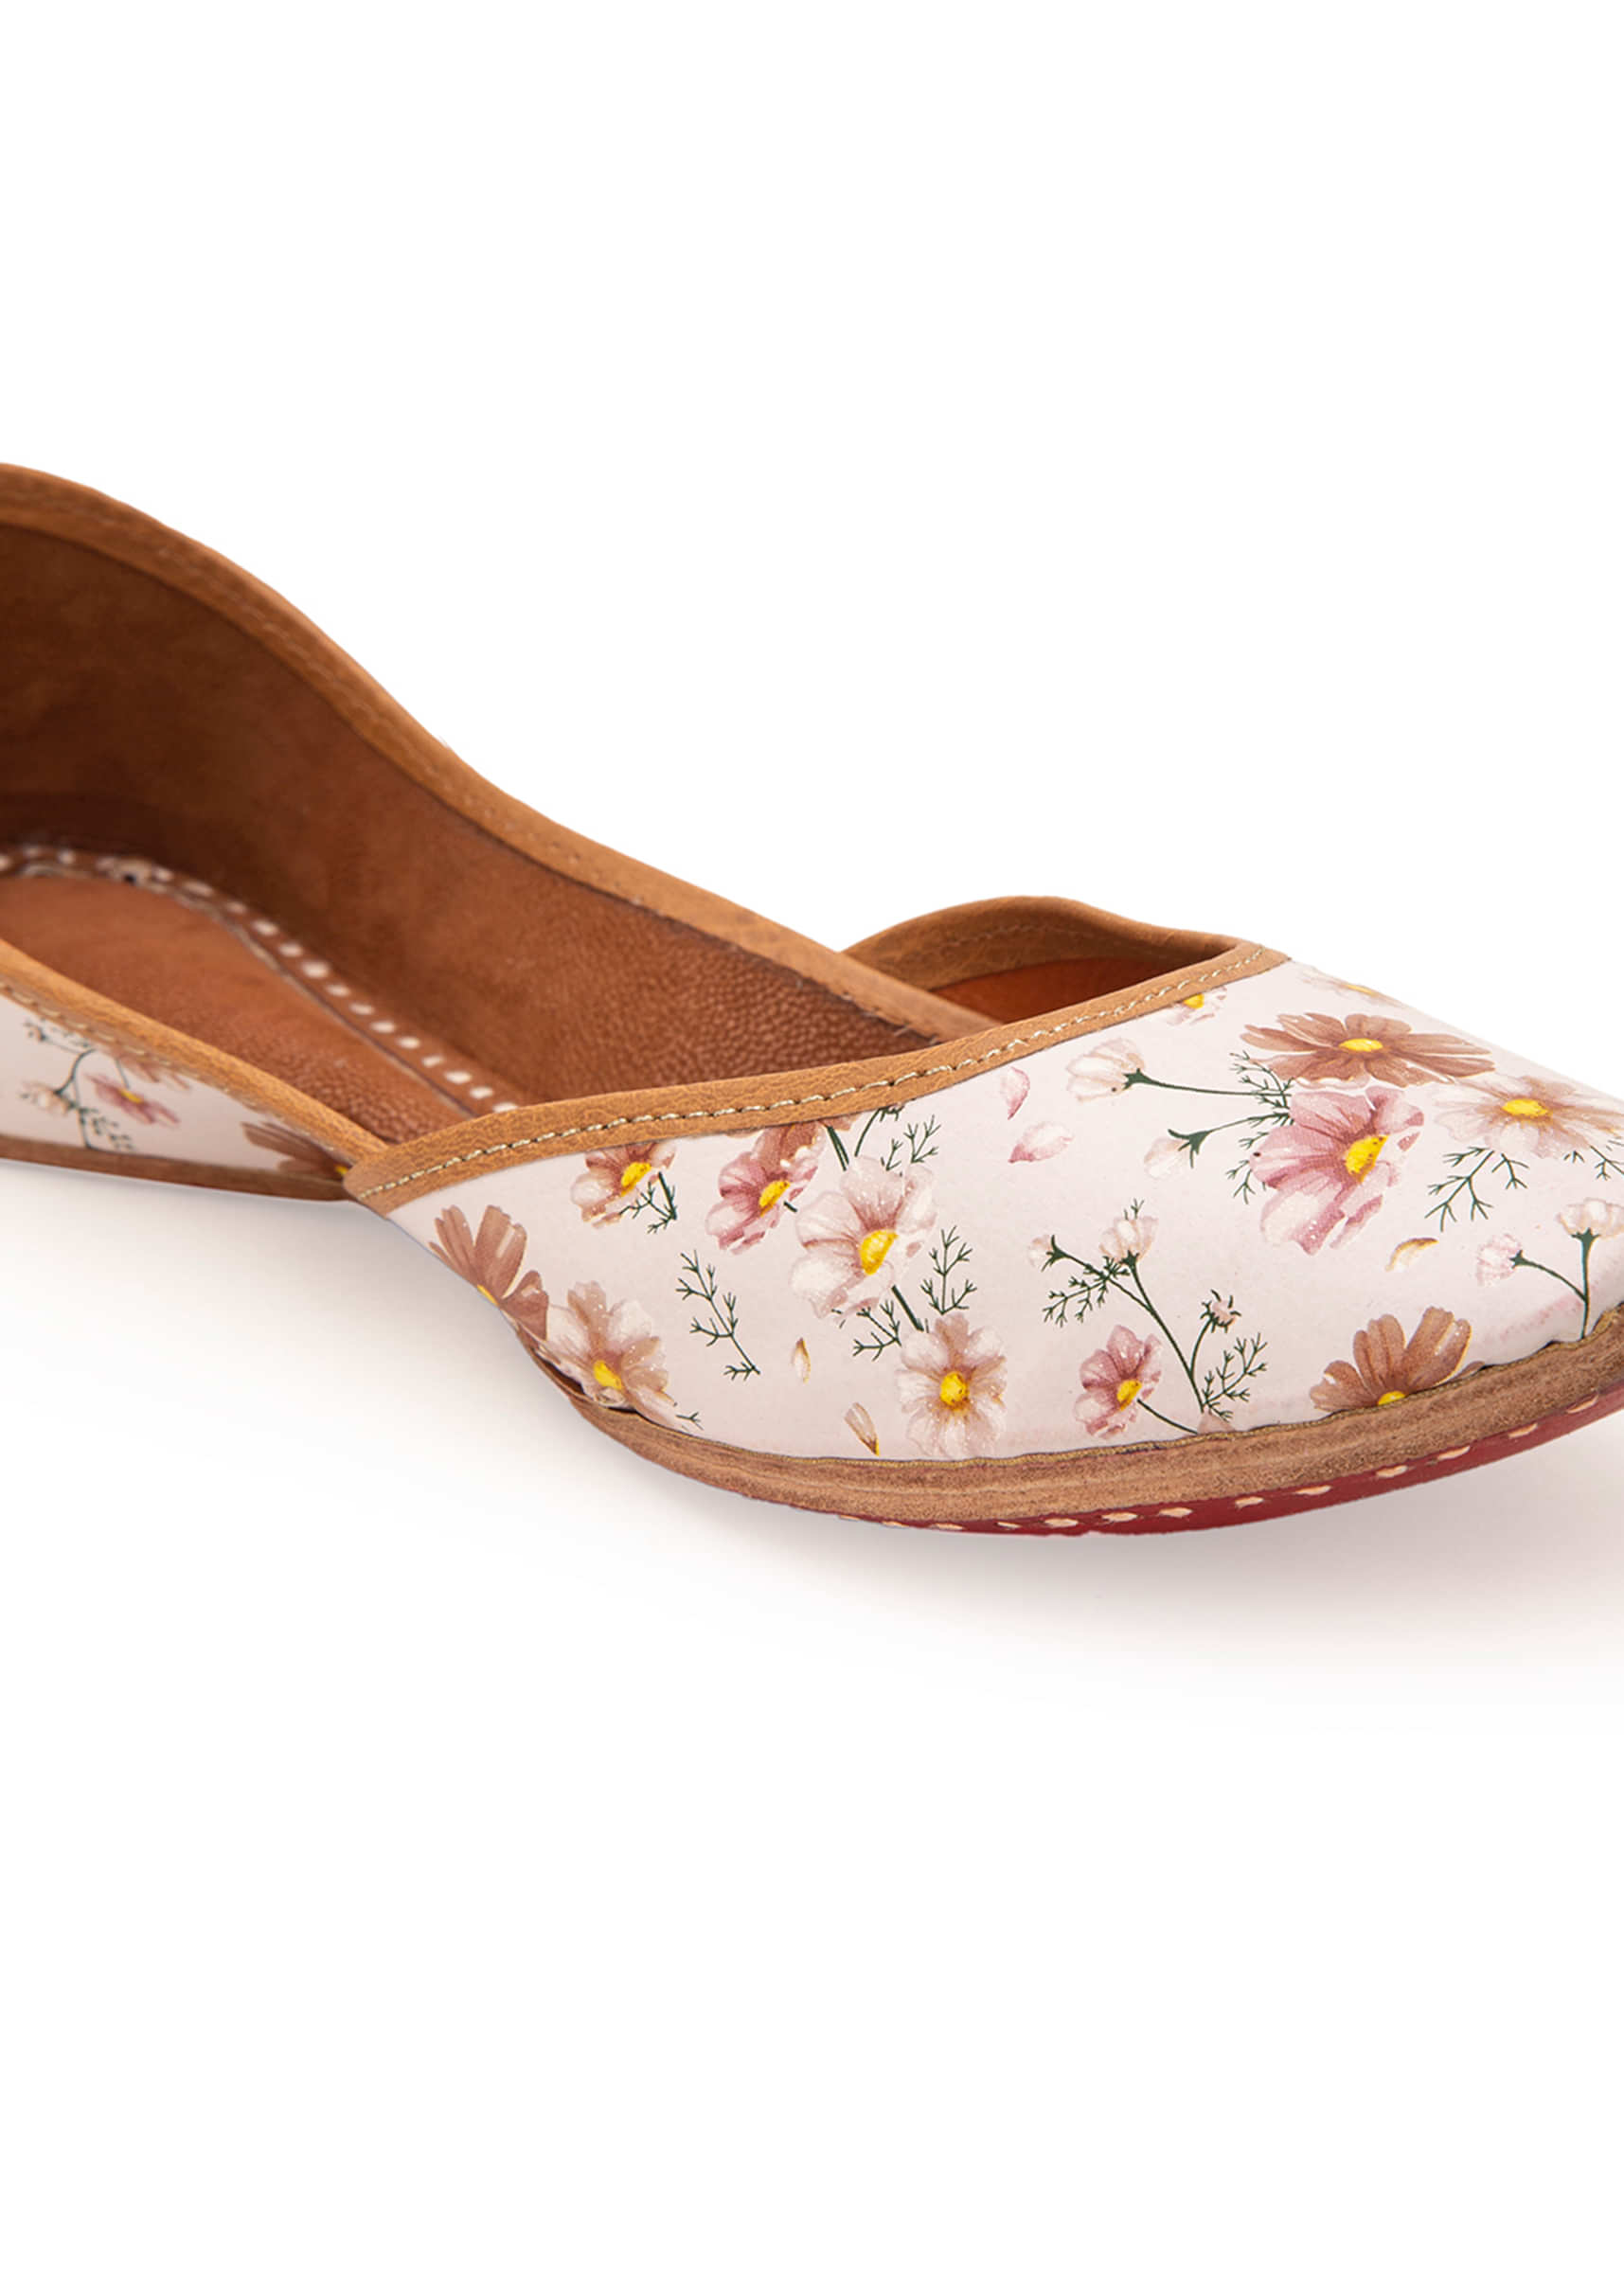 White Juttis In Multicoloured Theme With Digital Floral Print In Leather